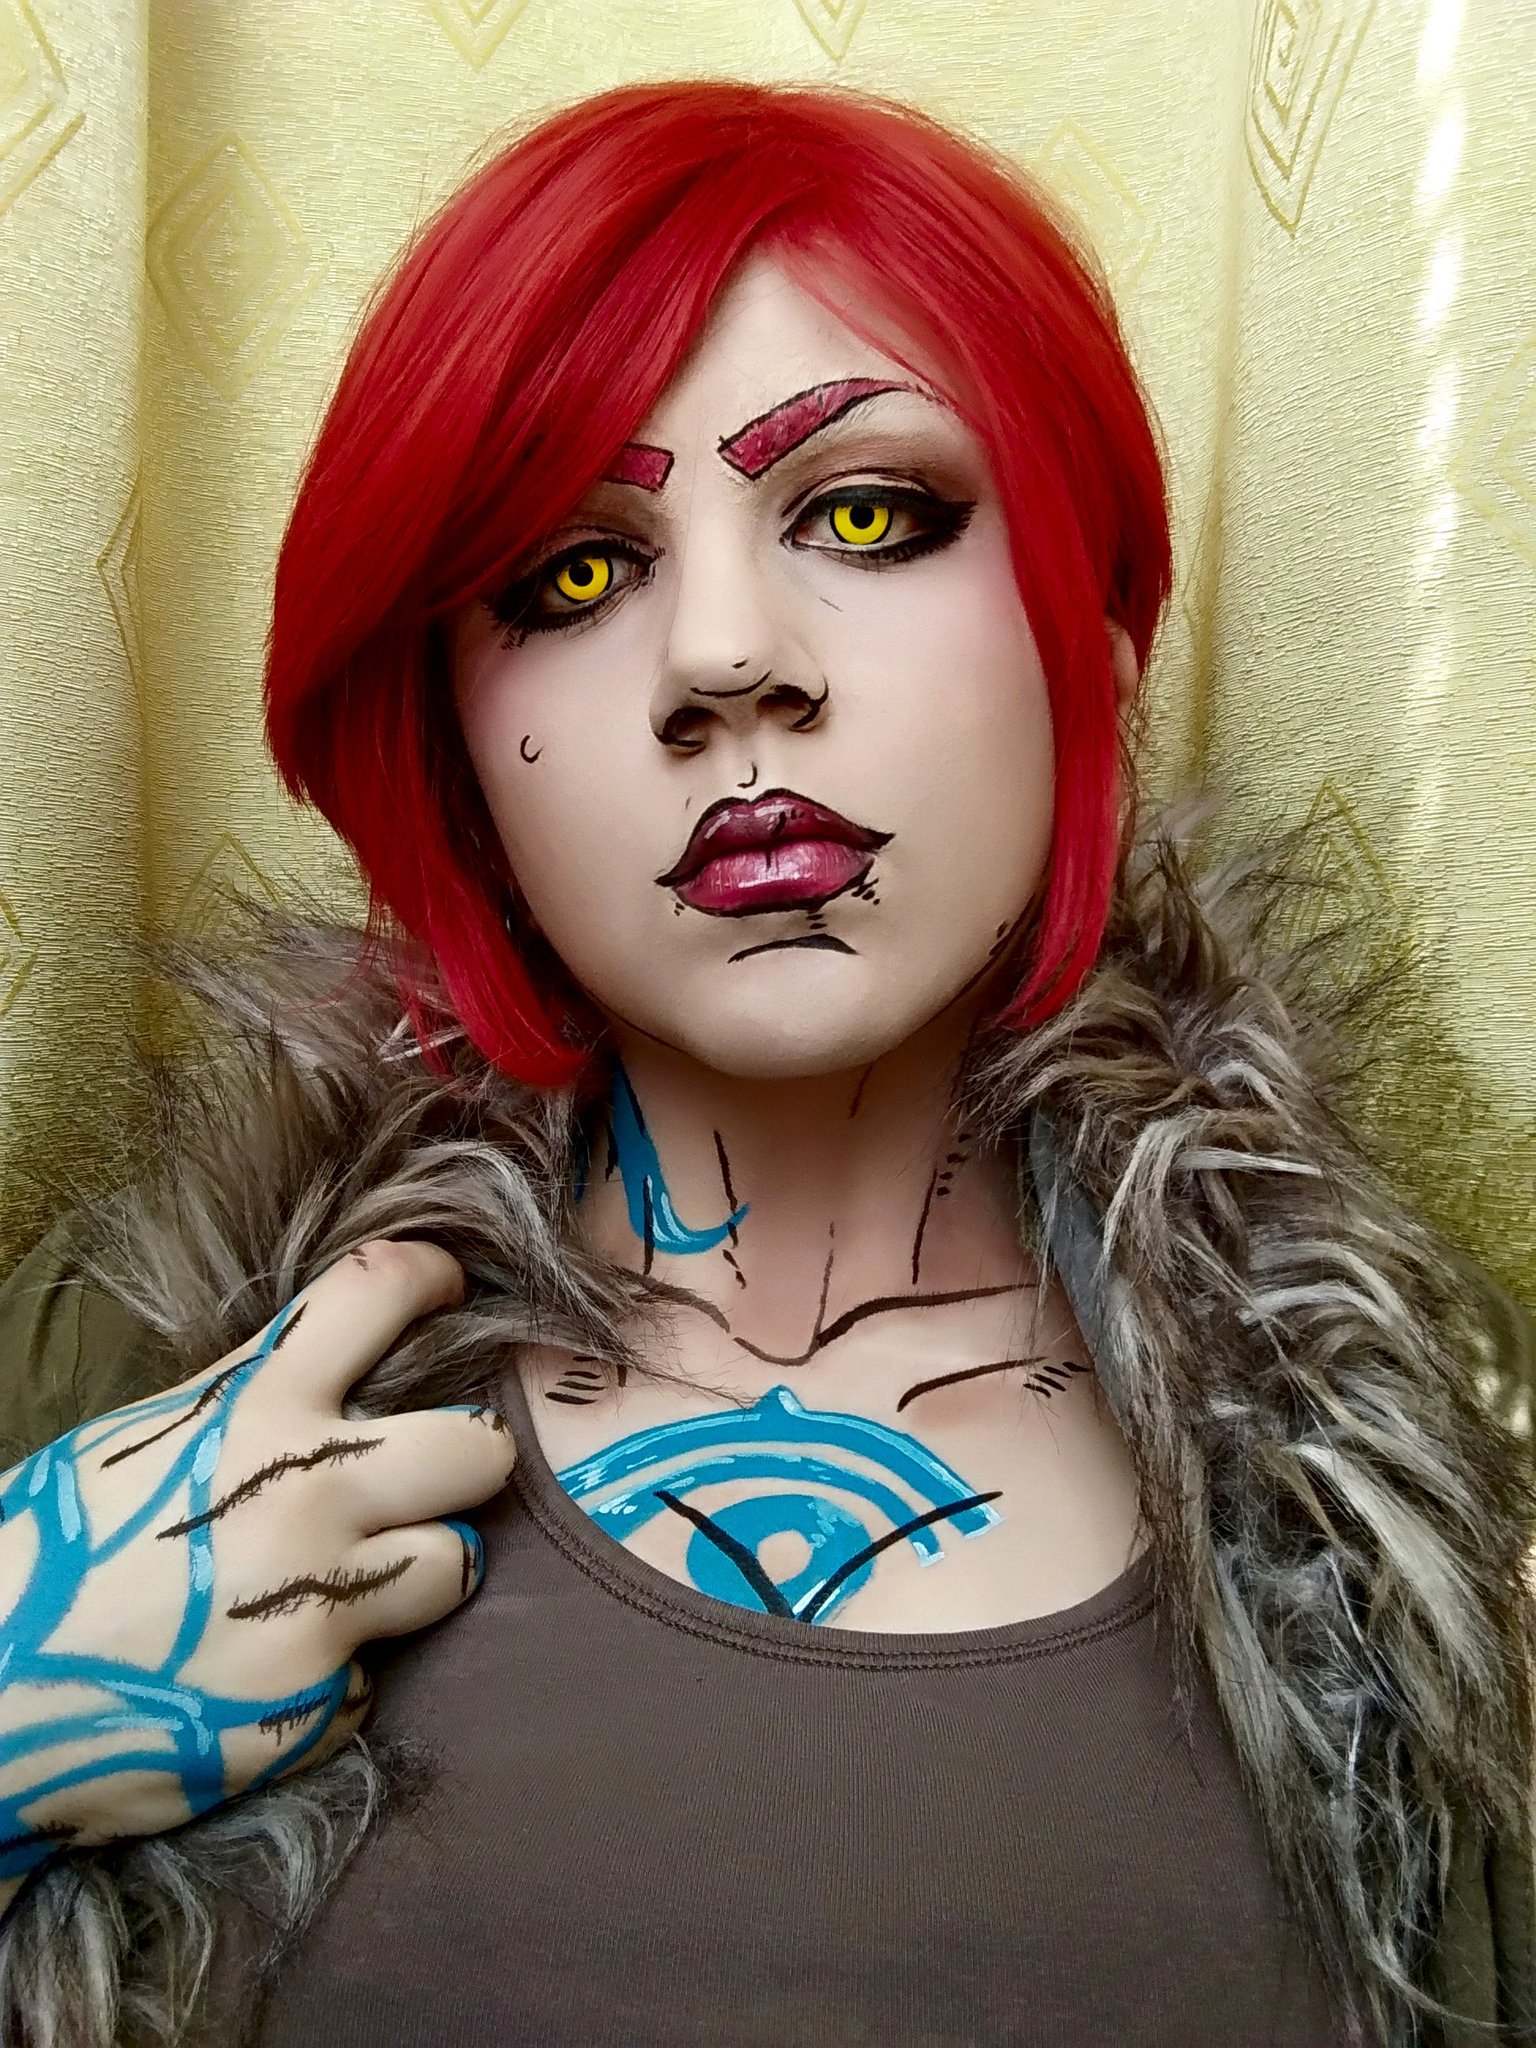 нασѕ gαllєяу 🔞 on "My cosplay makeup test for Lilith from Borderlands https://t.co/YEDN8DySiM" / Twitter